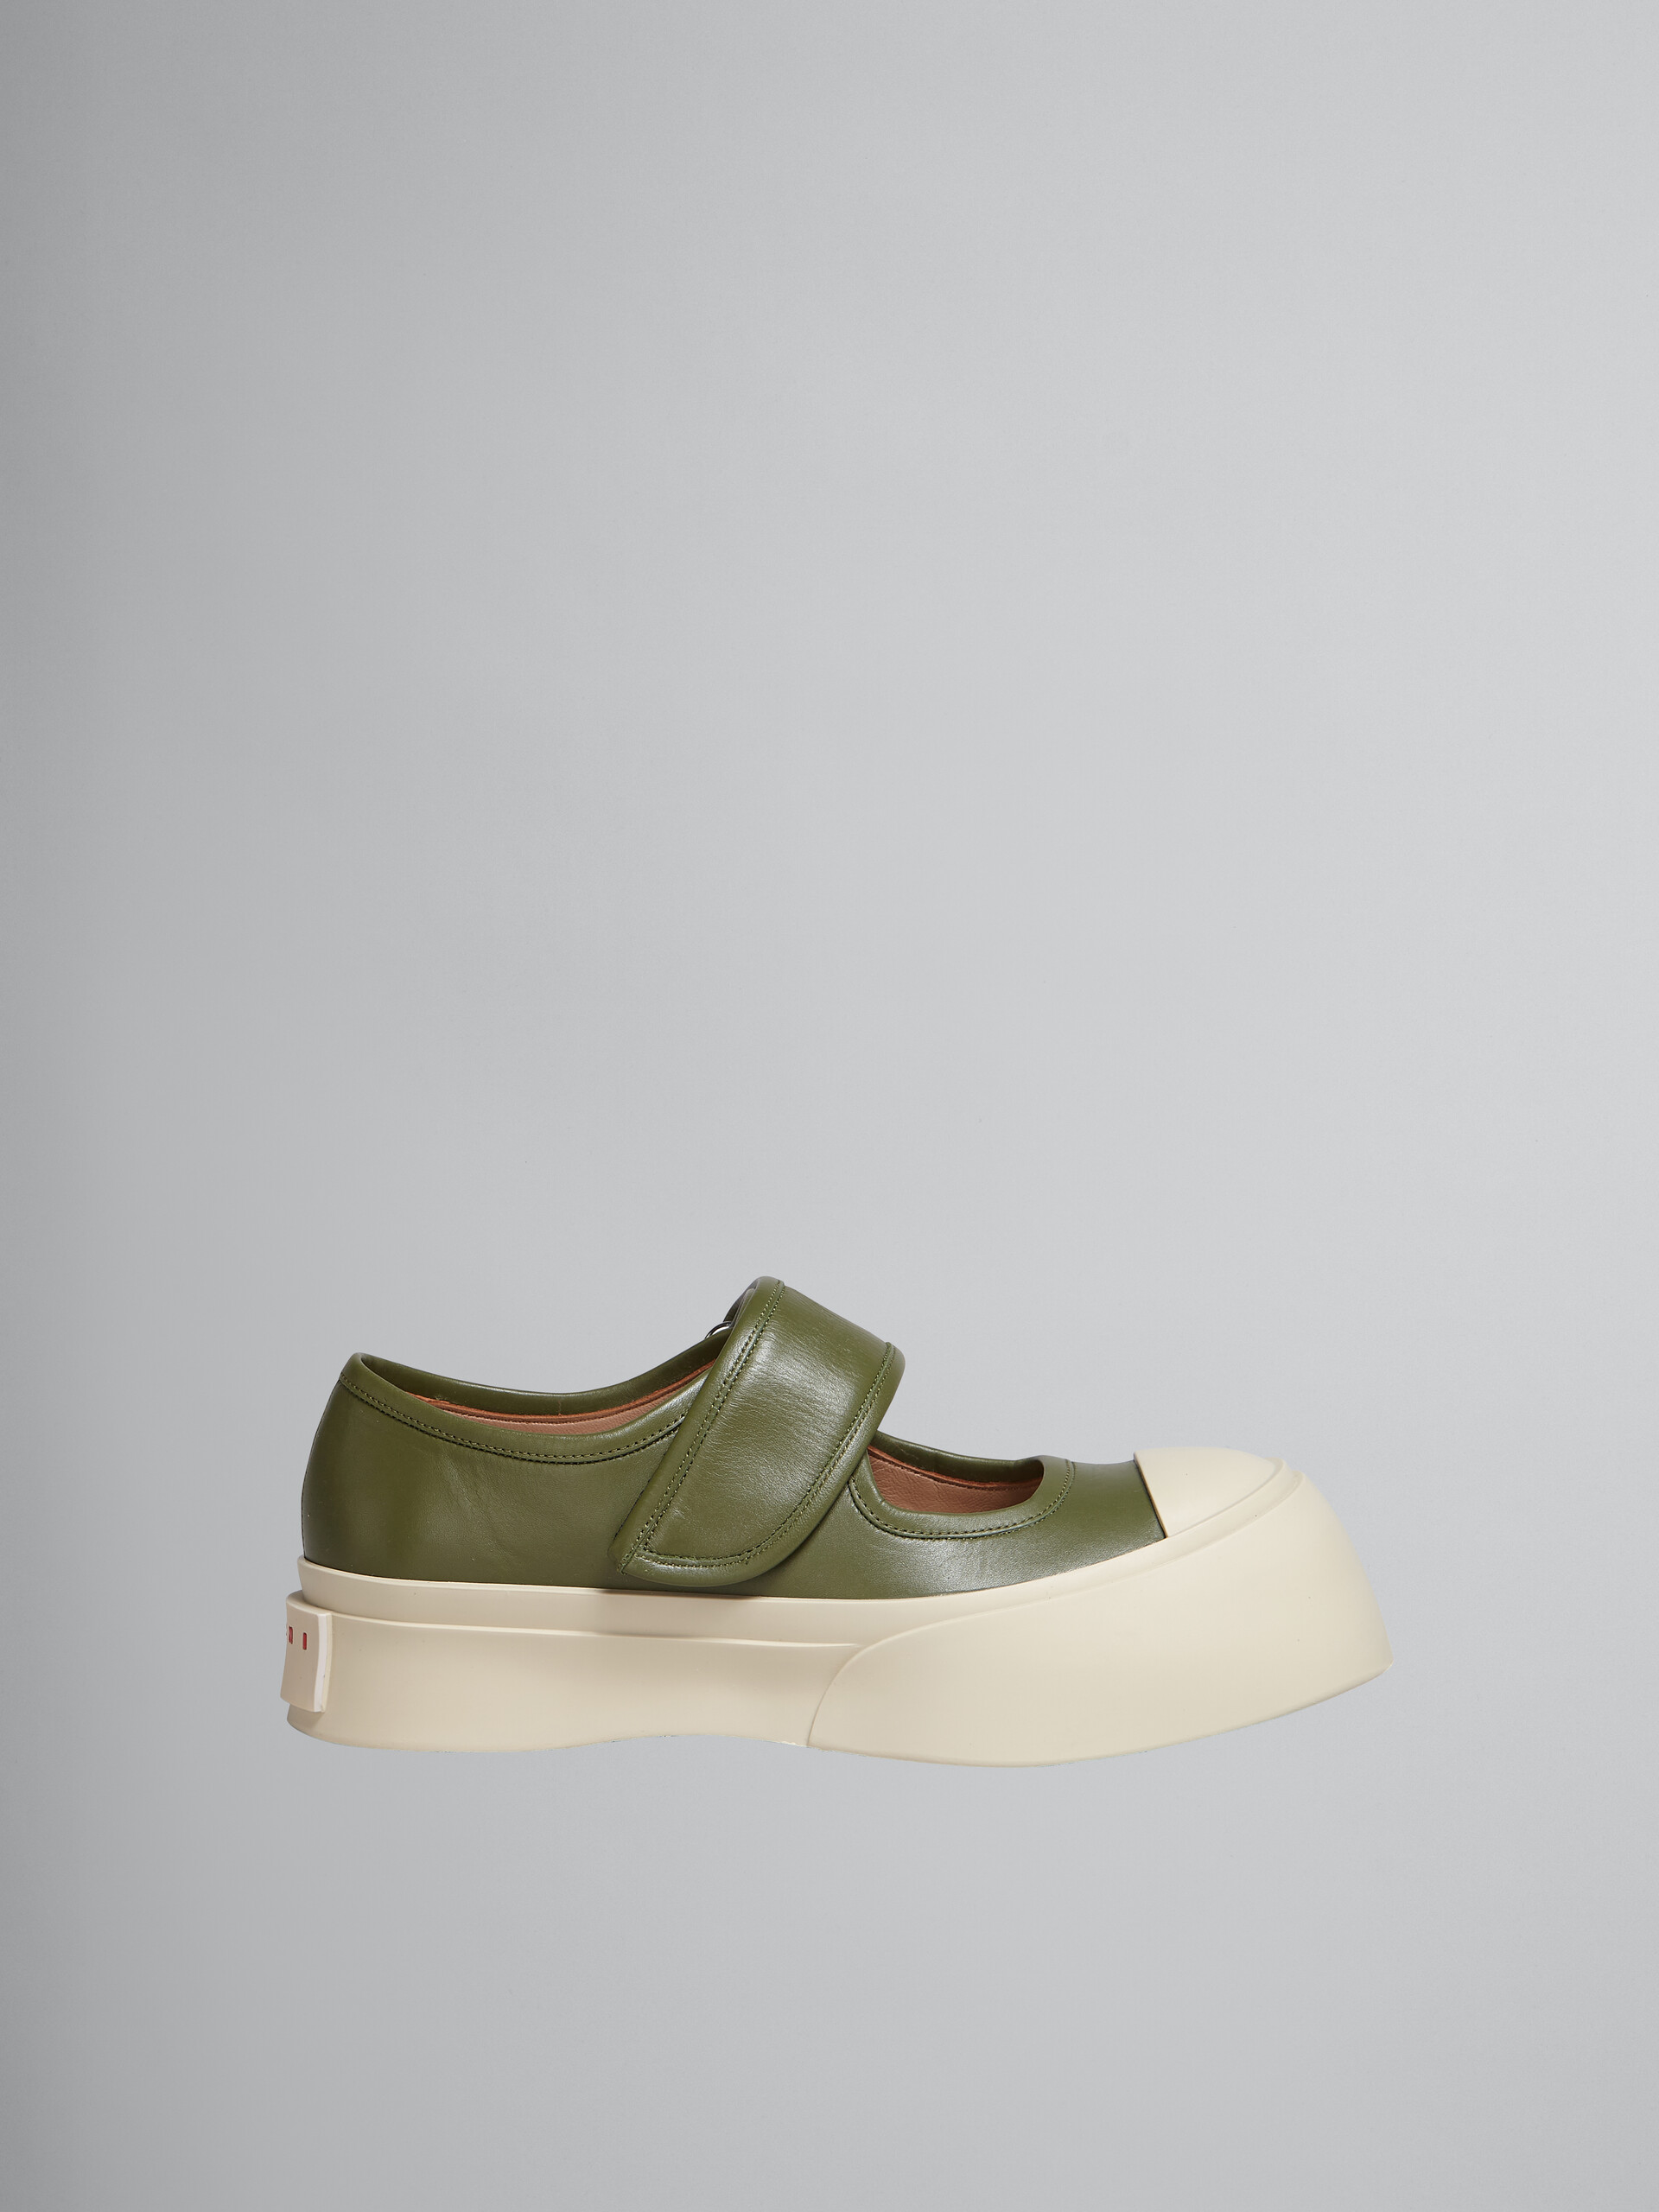 Green nappa leather PABLO Mary-Jane sneaker - Sneakers - Image 1